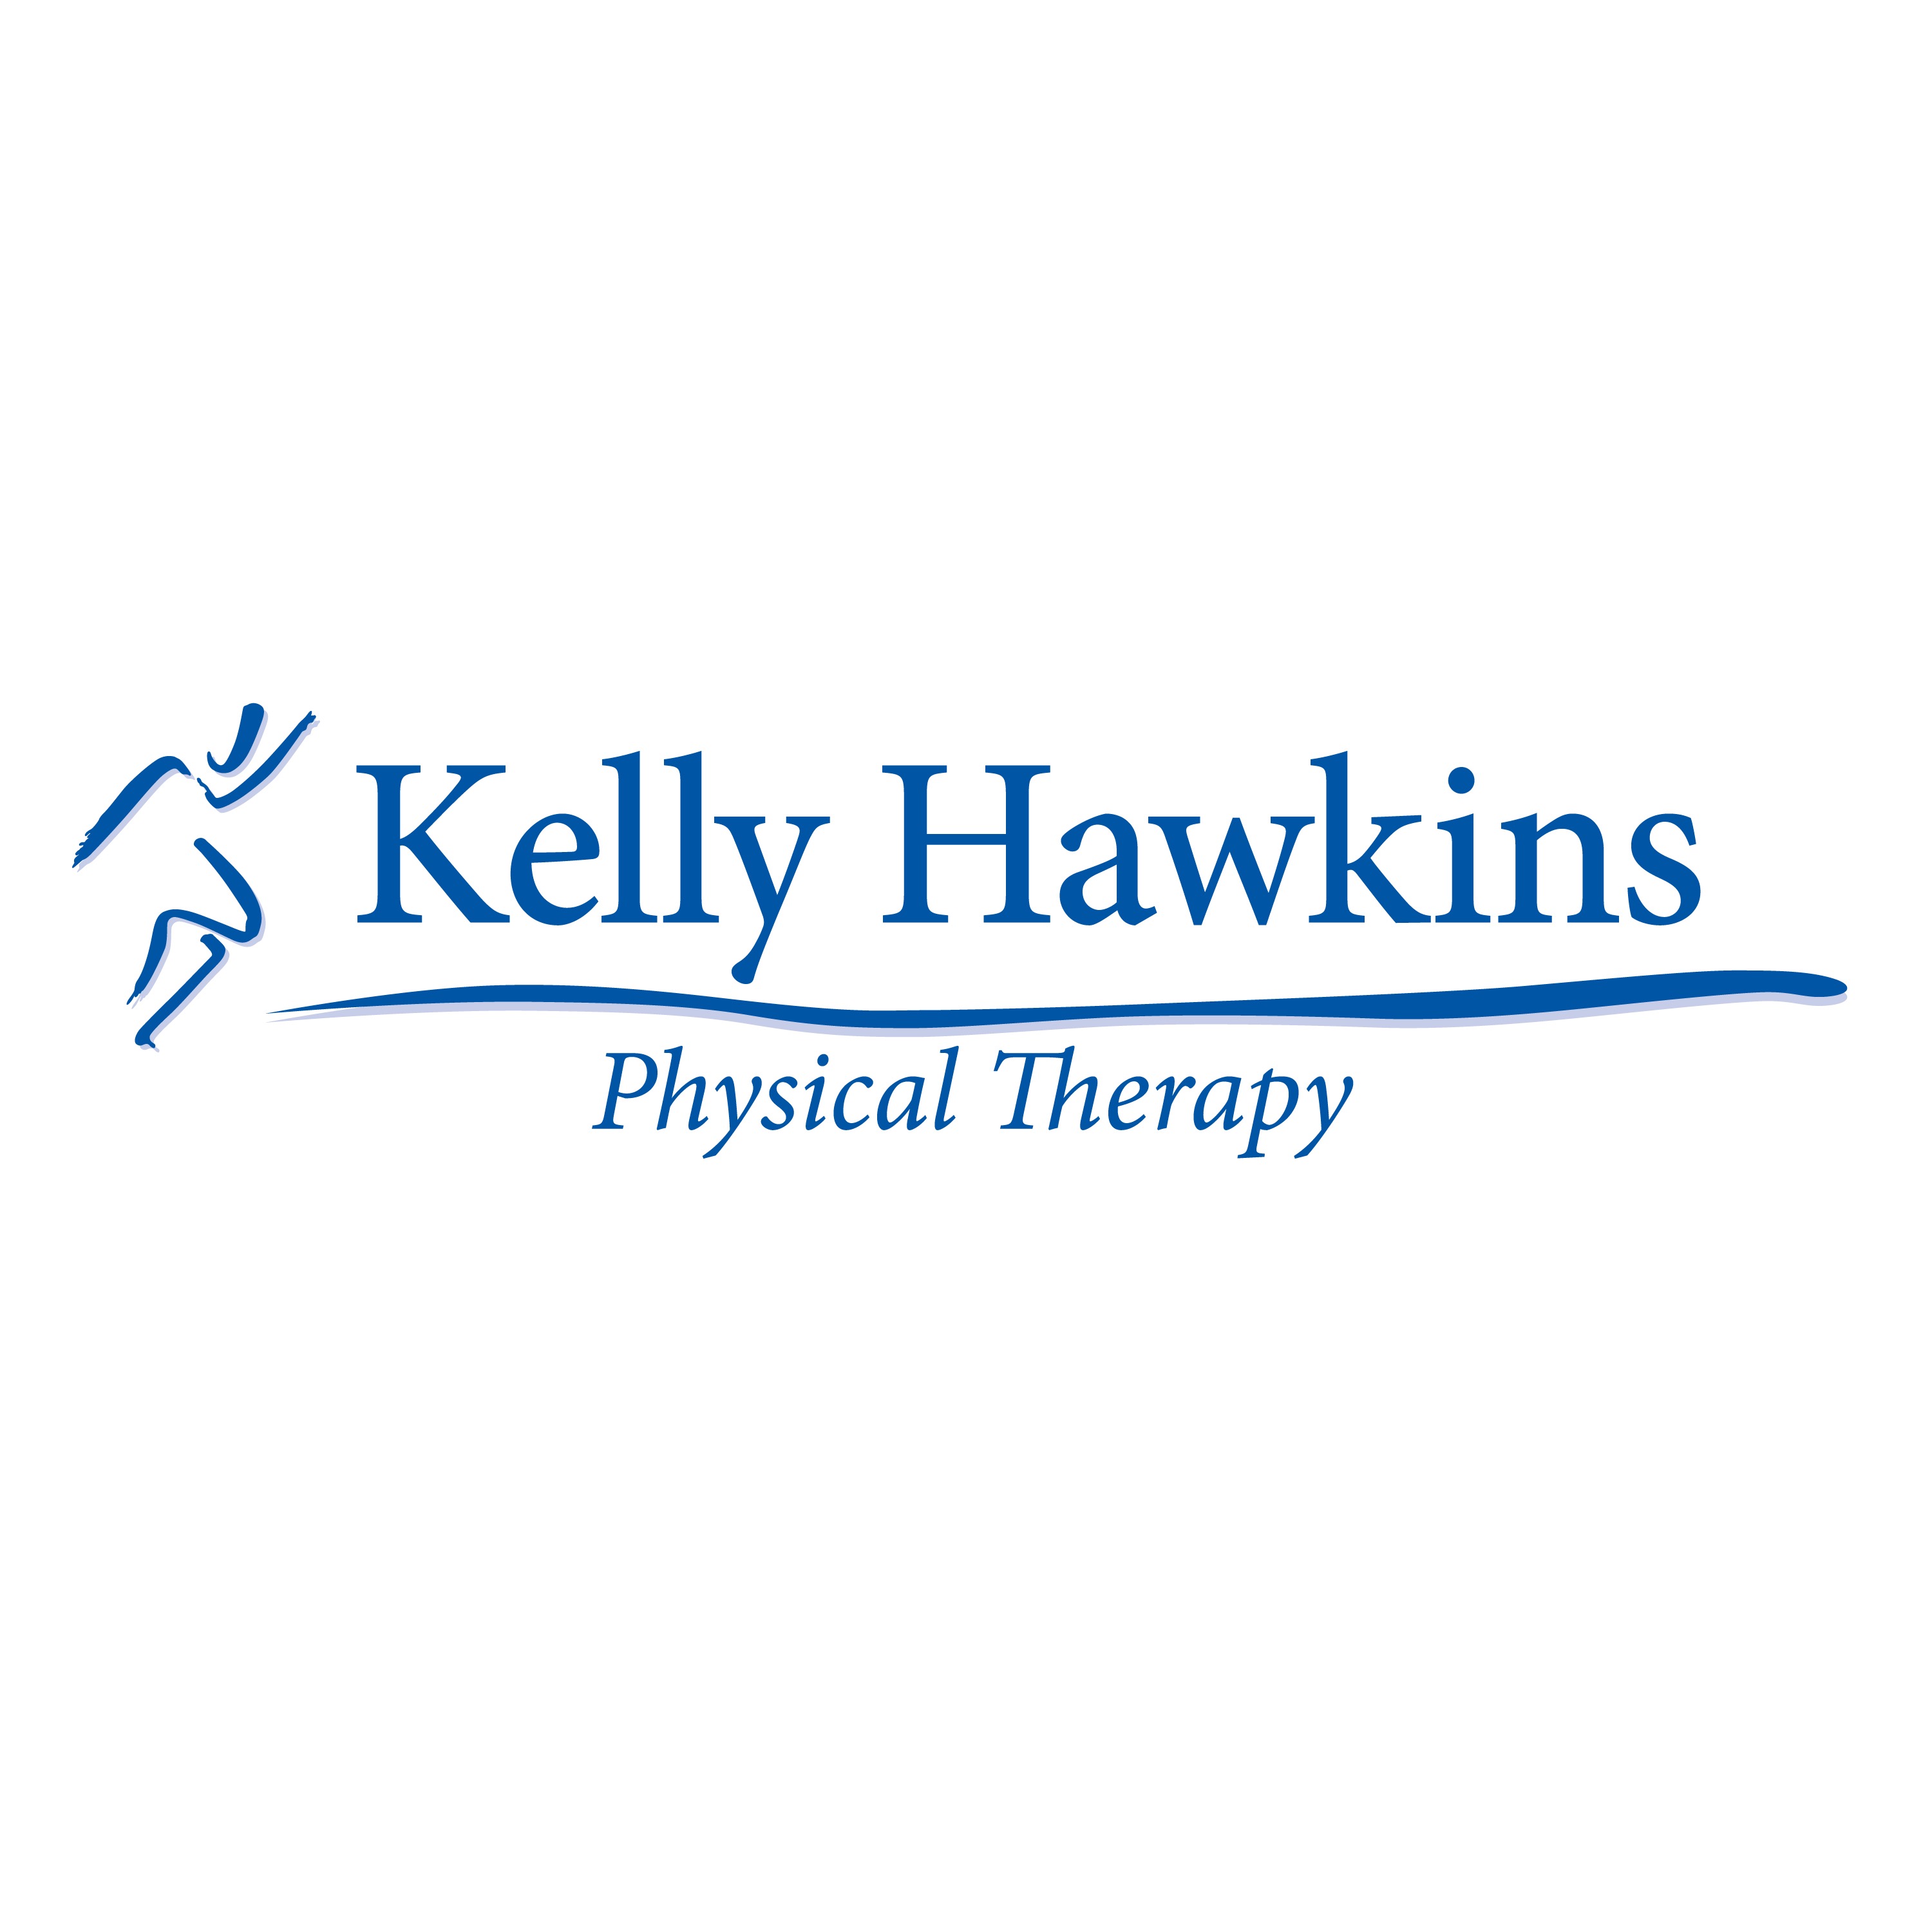 Kelly Hawkins Physical Therapy - Las Vegas, Valley View - Las Vegas, NV 89102 - (702)876-1733 | ShowMeLocal.com